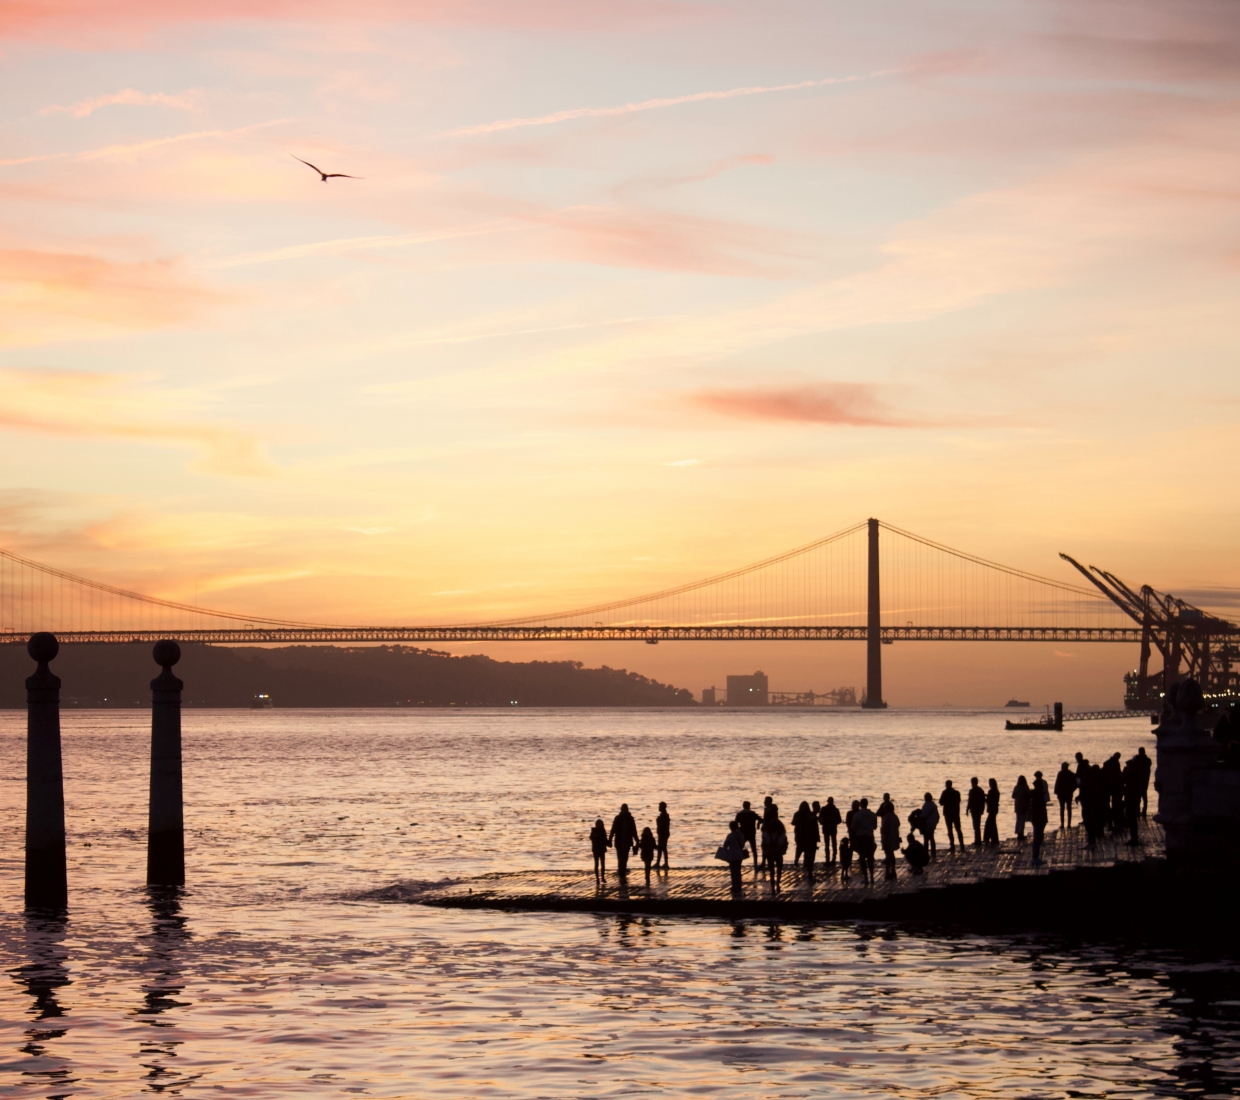 Accommodation guide to the best places to stay in the region of Lisbon